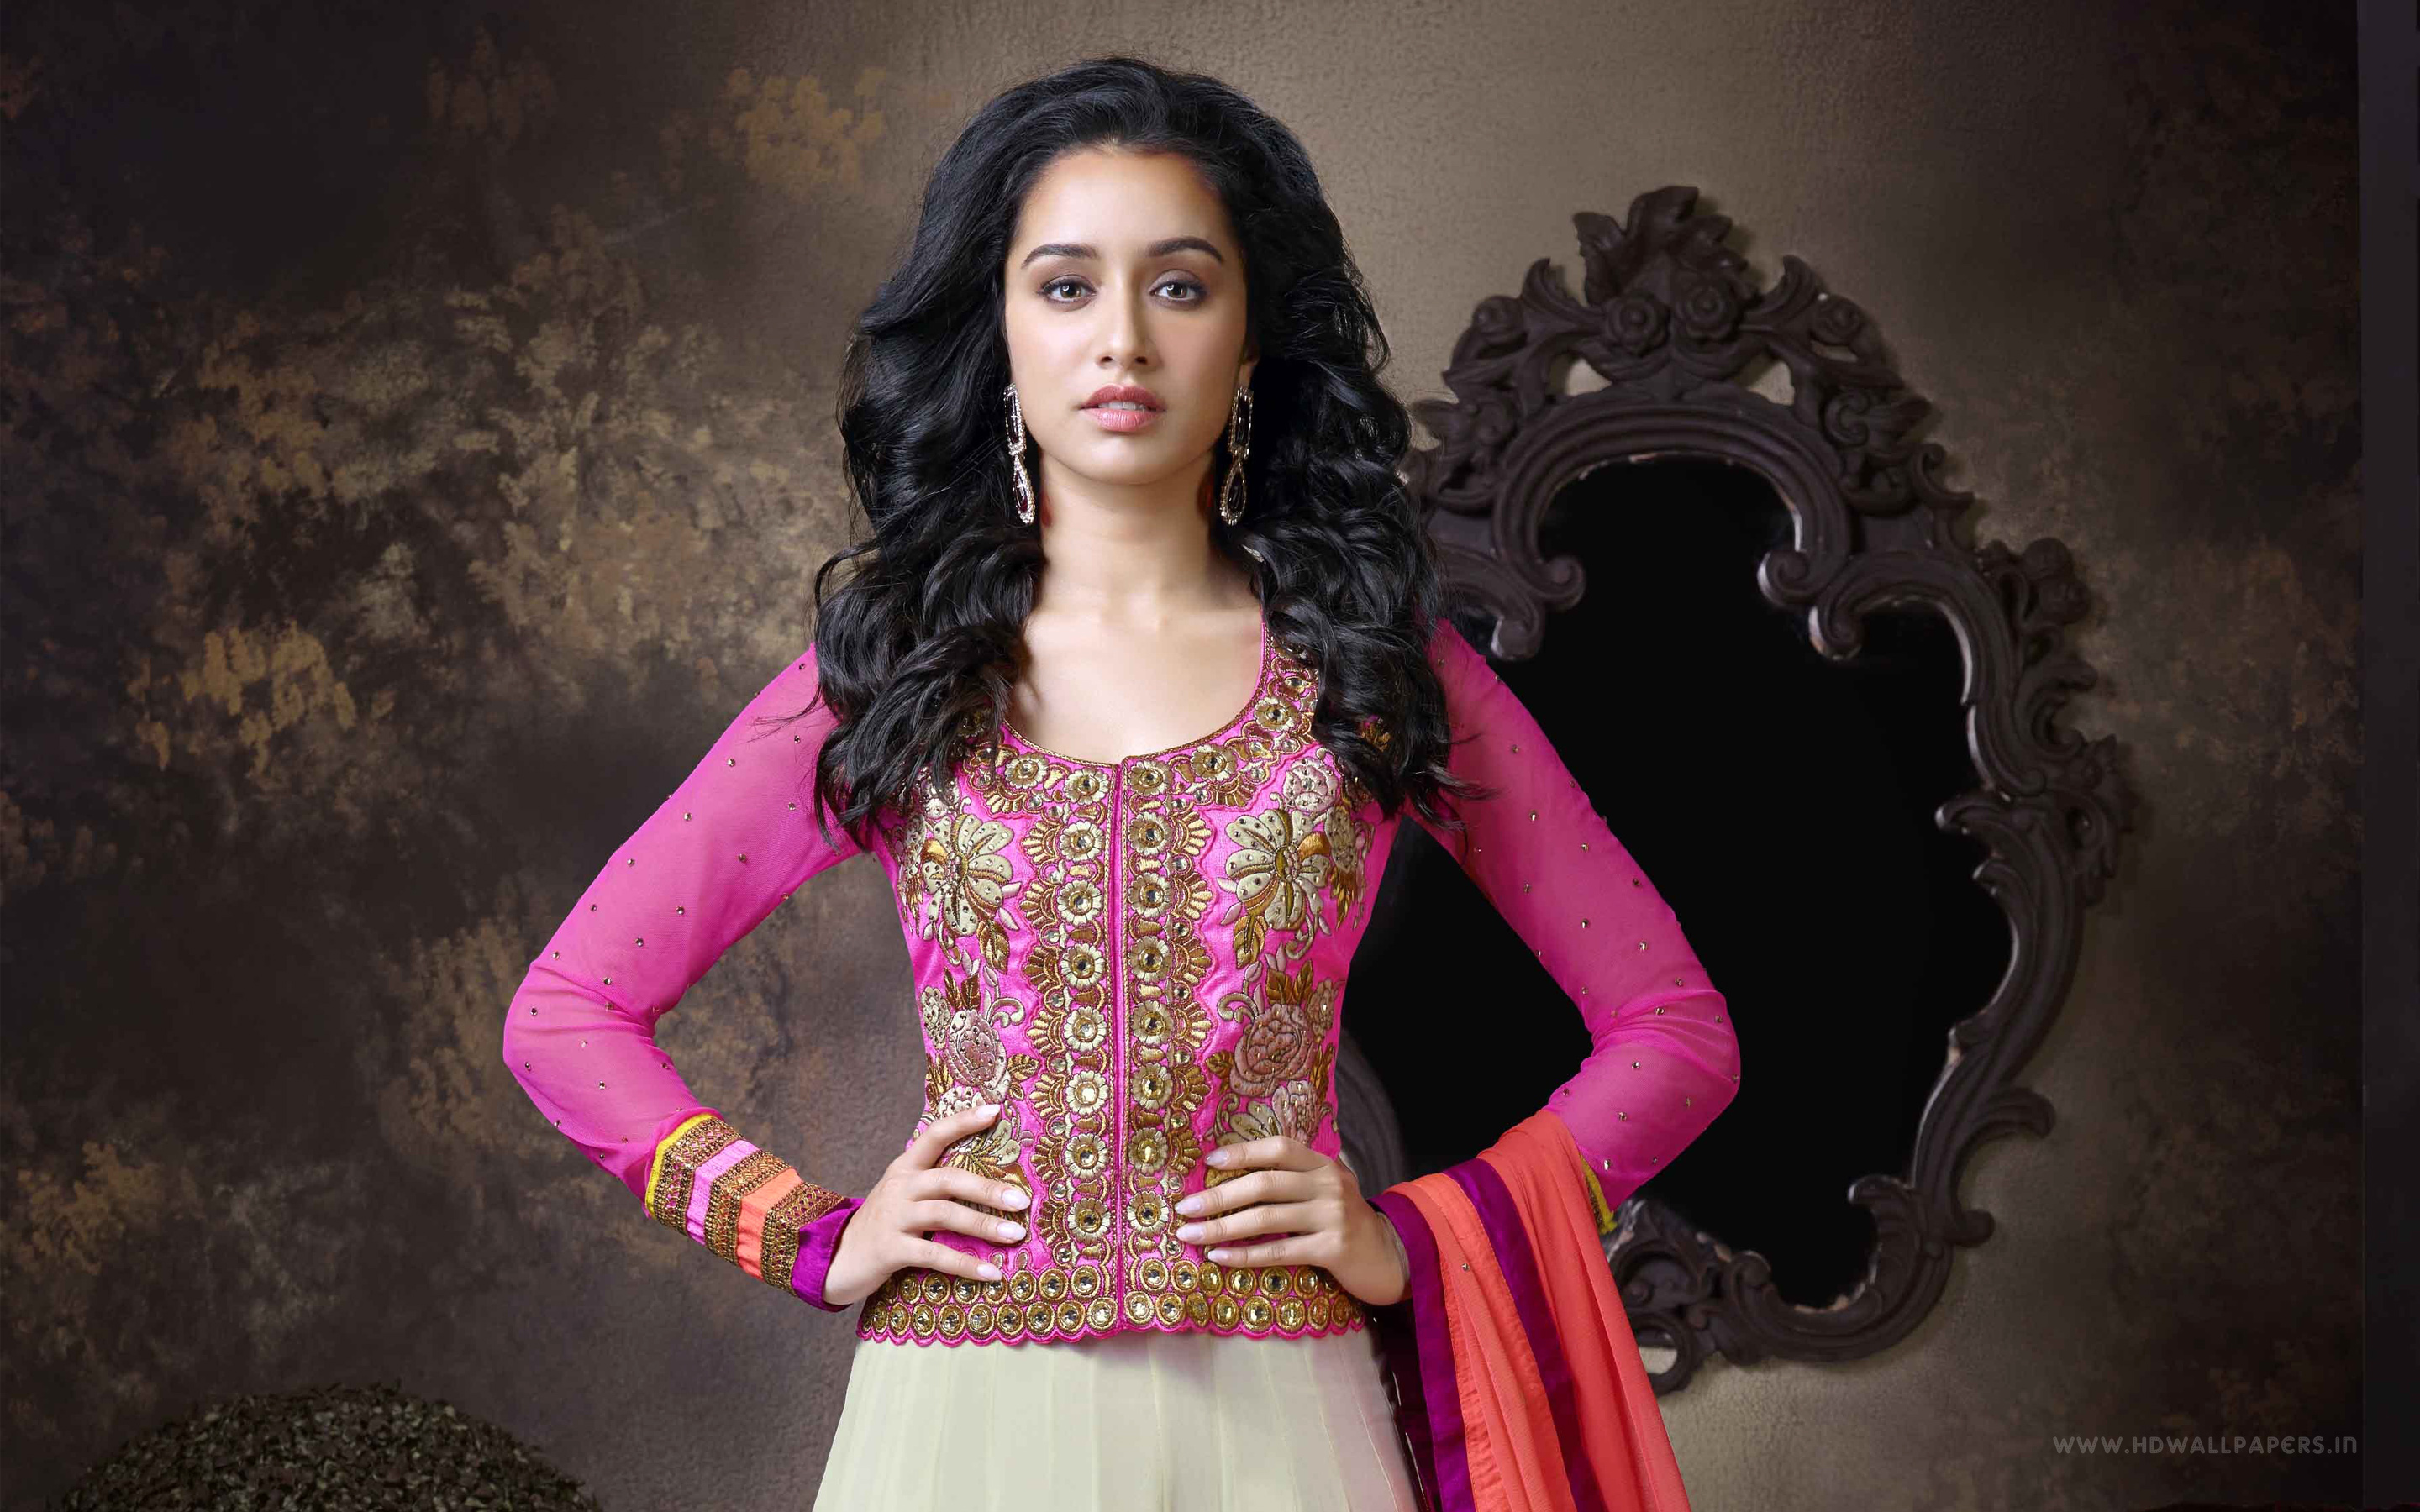 shraddha wallpapers, photos and desktop backgrounds up to ...